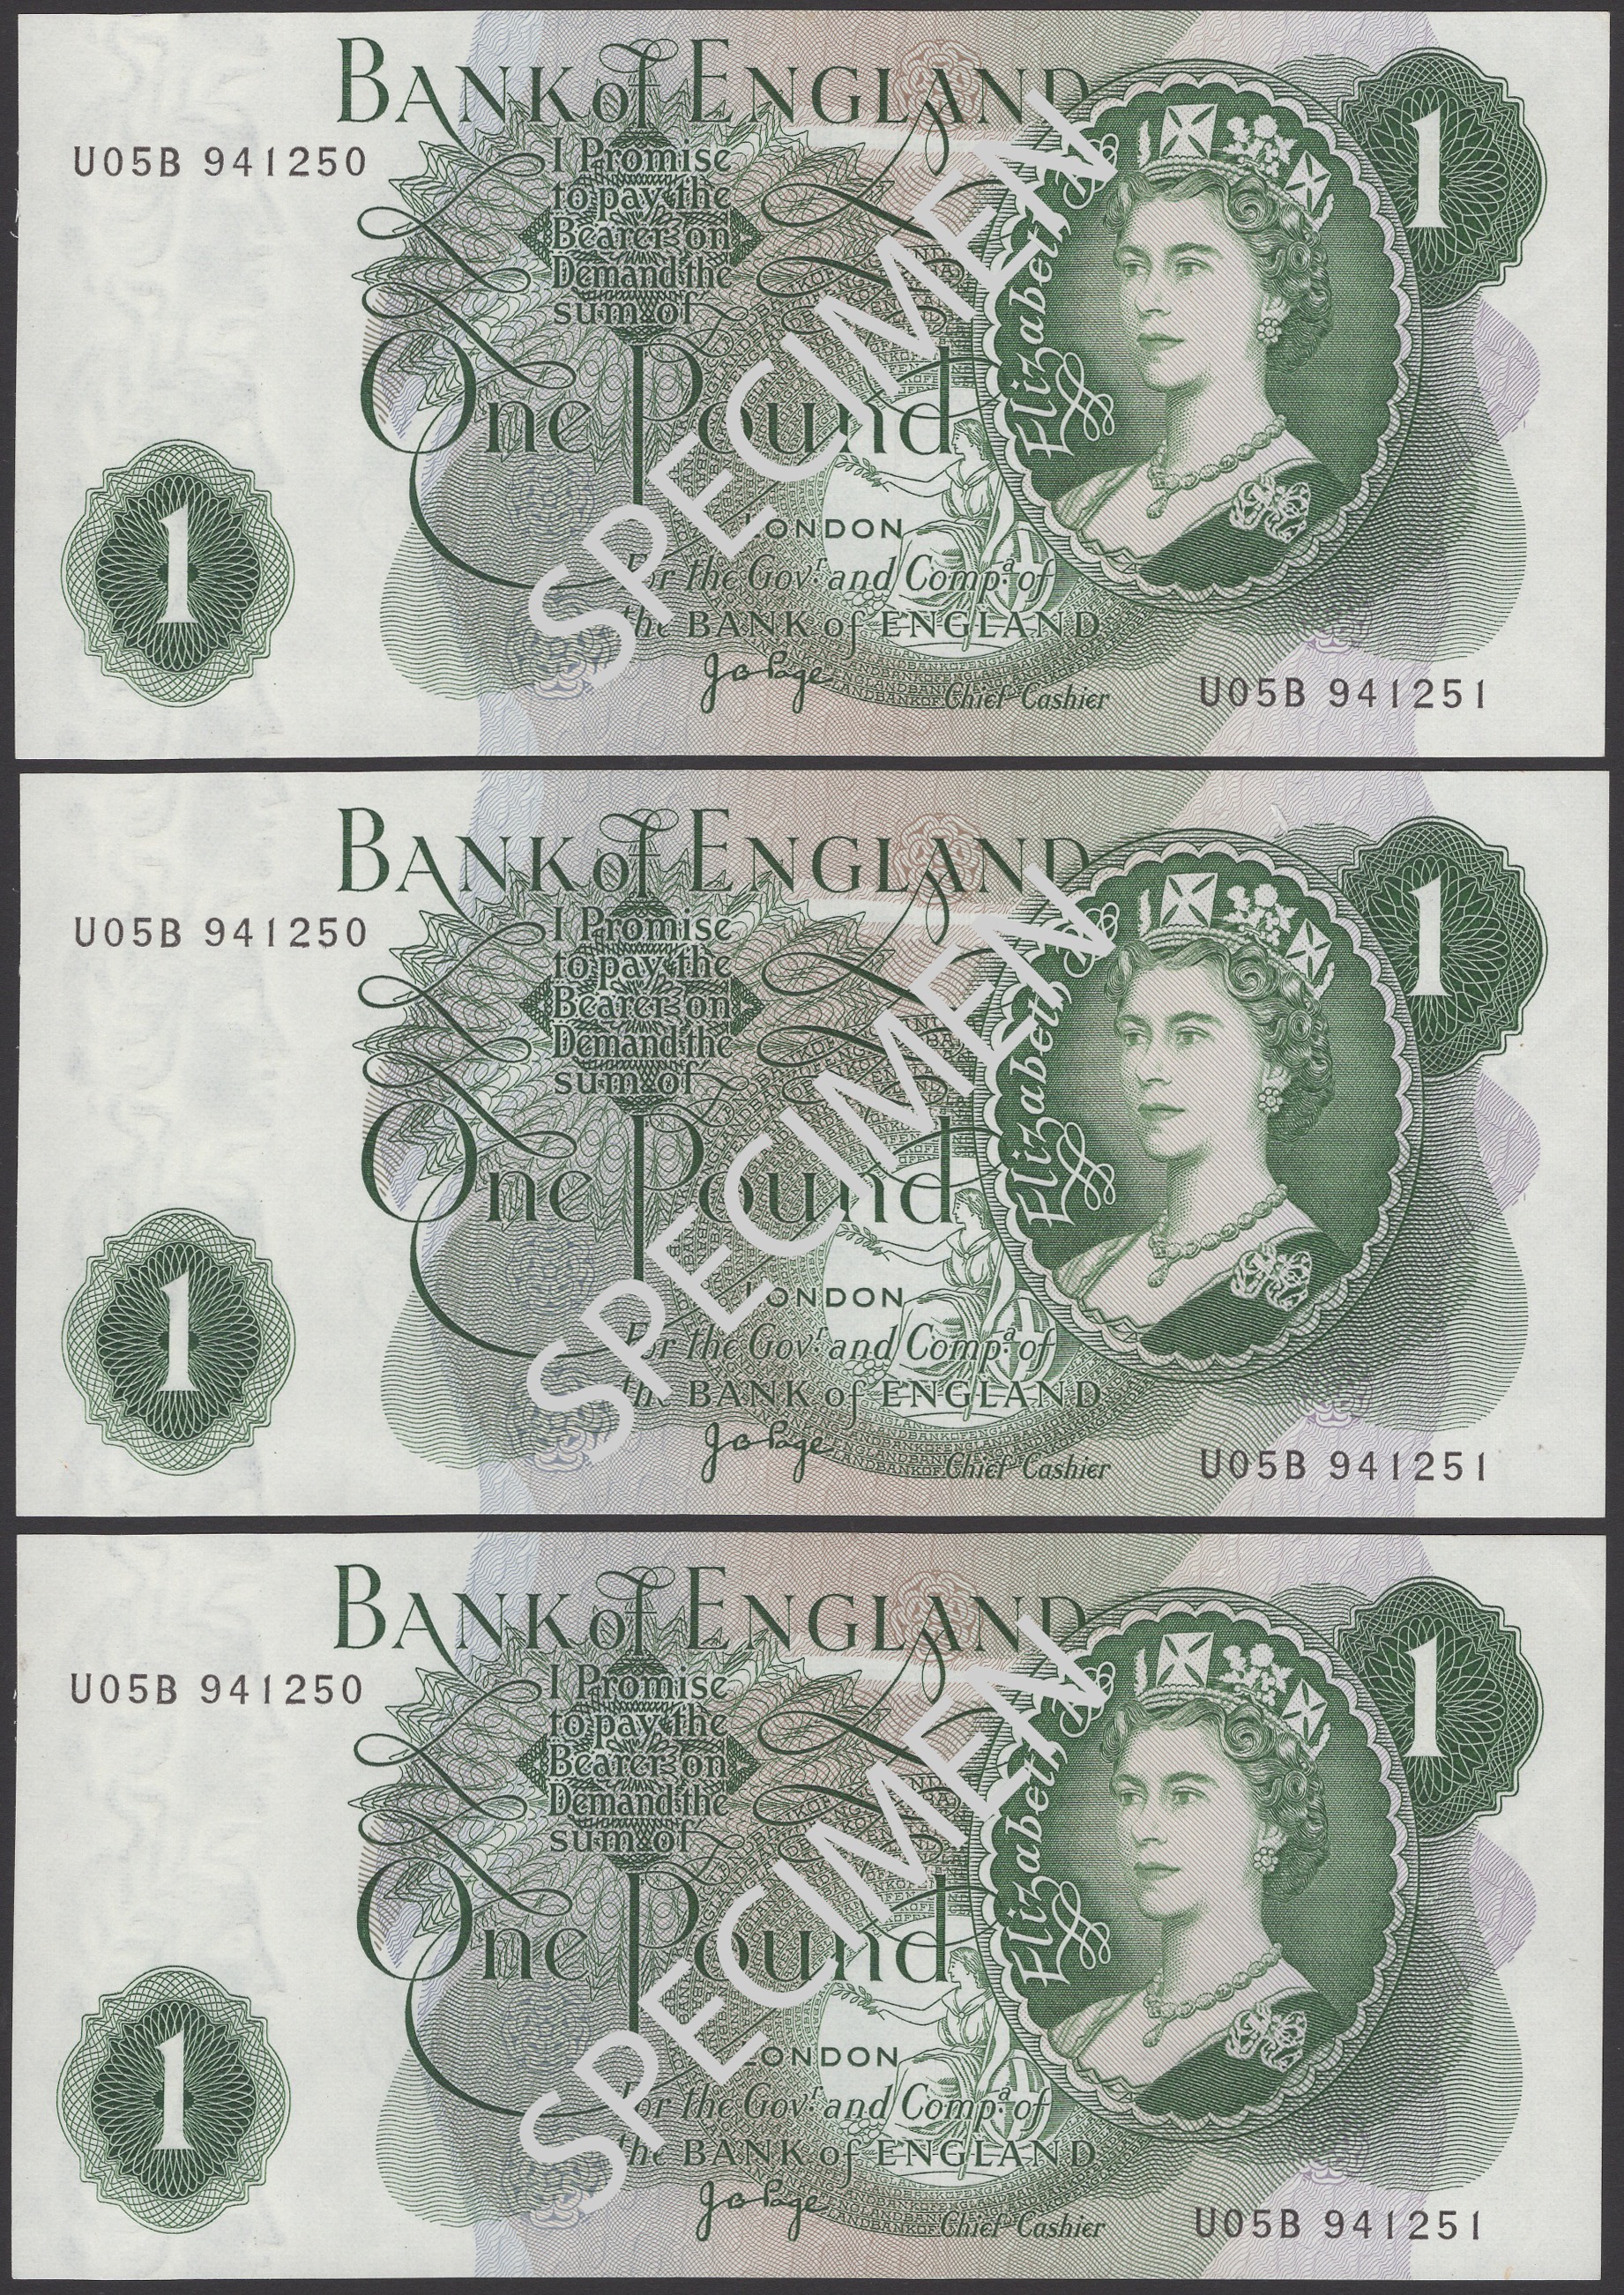 A Remarkable Collection of Bank of England Errors - Part Three